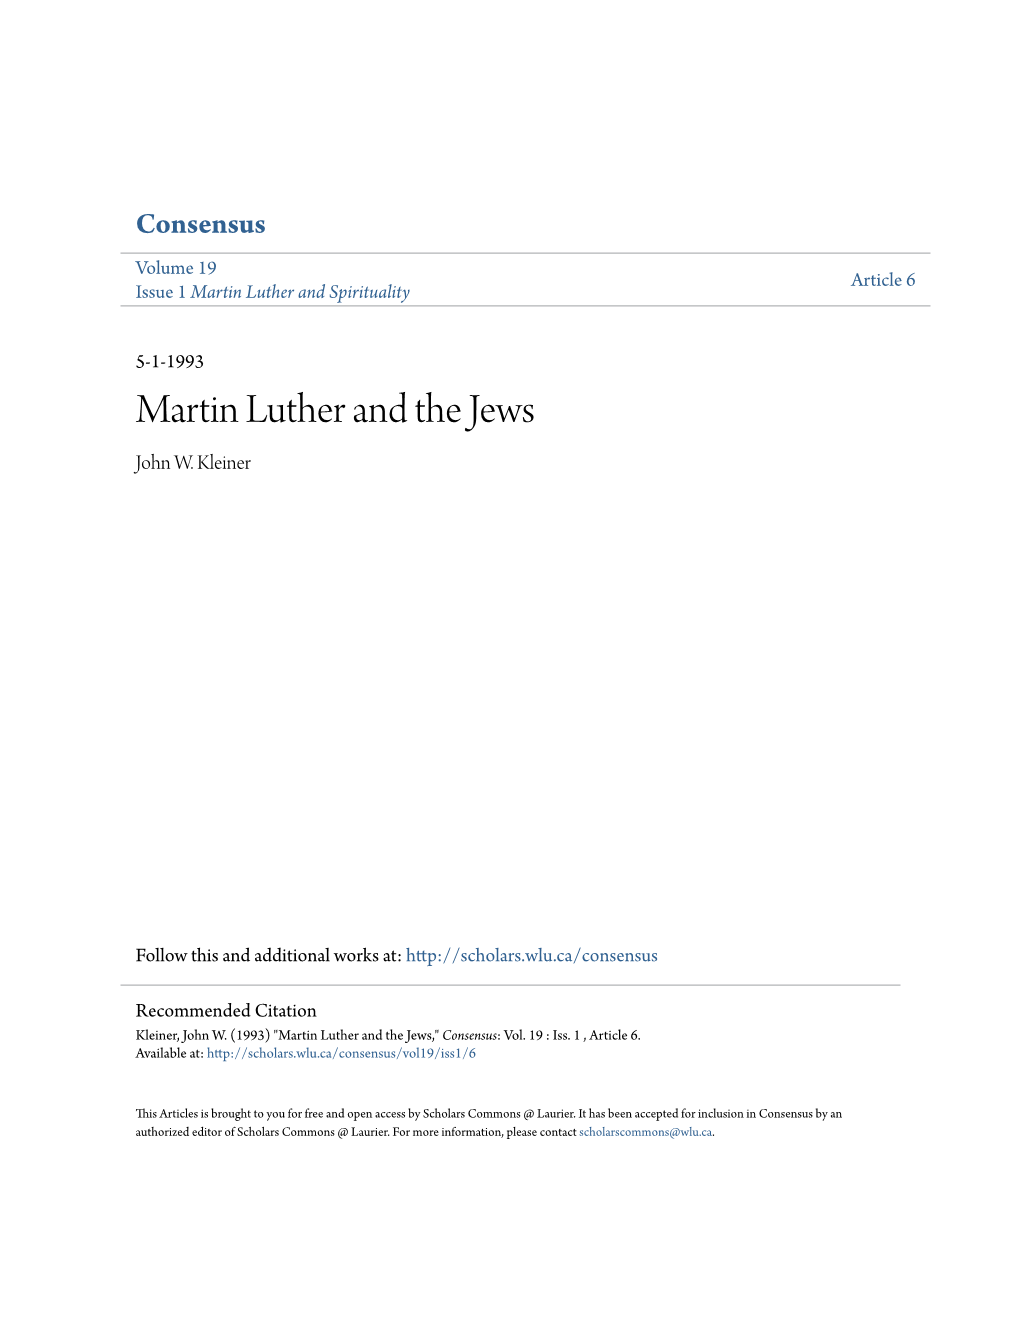 Martin Luther and the Jews John W